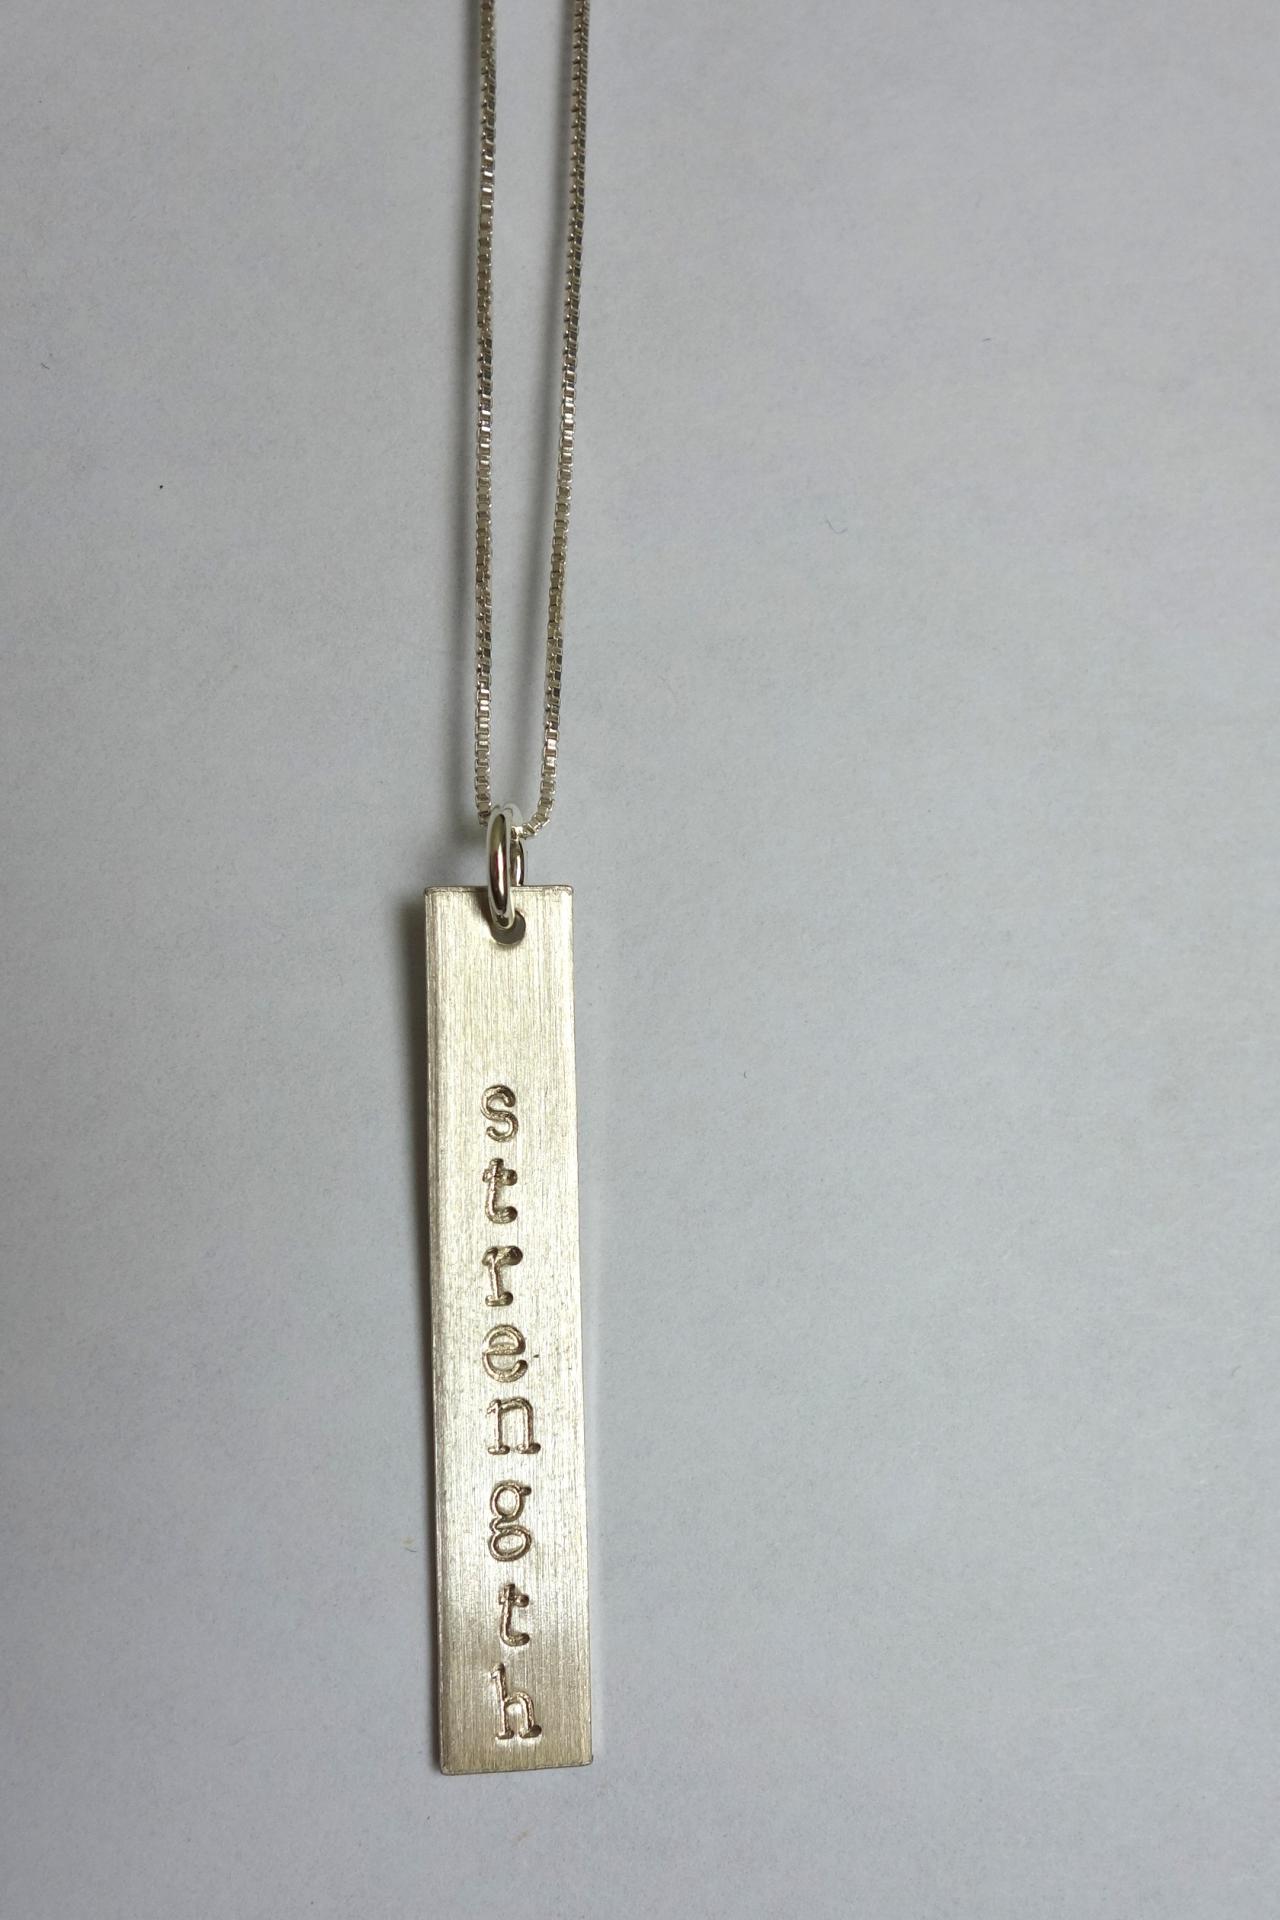 Personalized Necklace, Sterling Silver, 1.5" X .25" Bar With "strength" On It